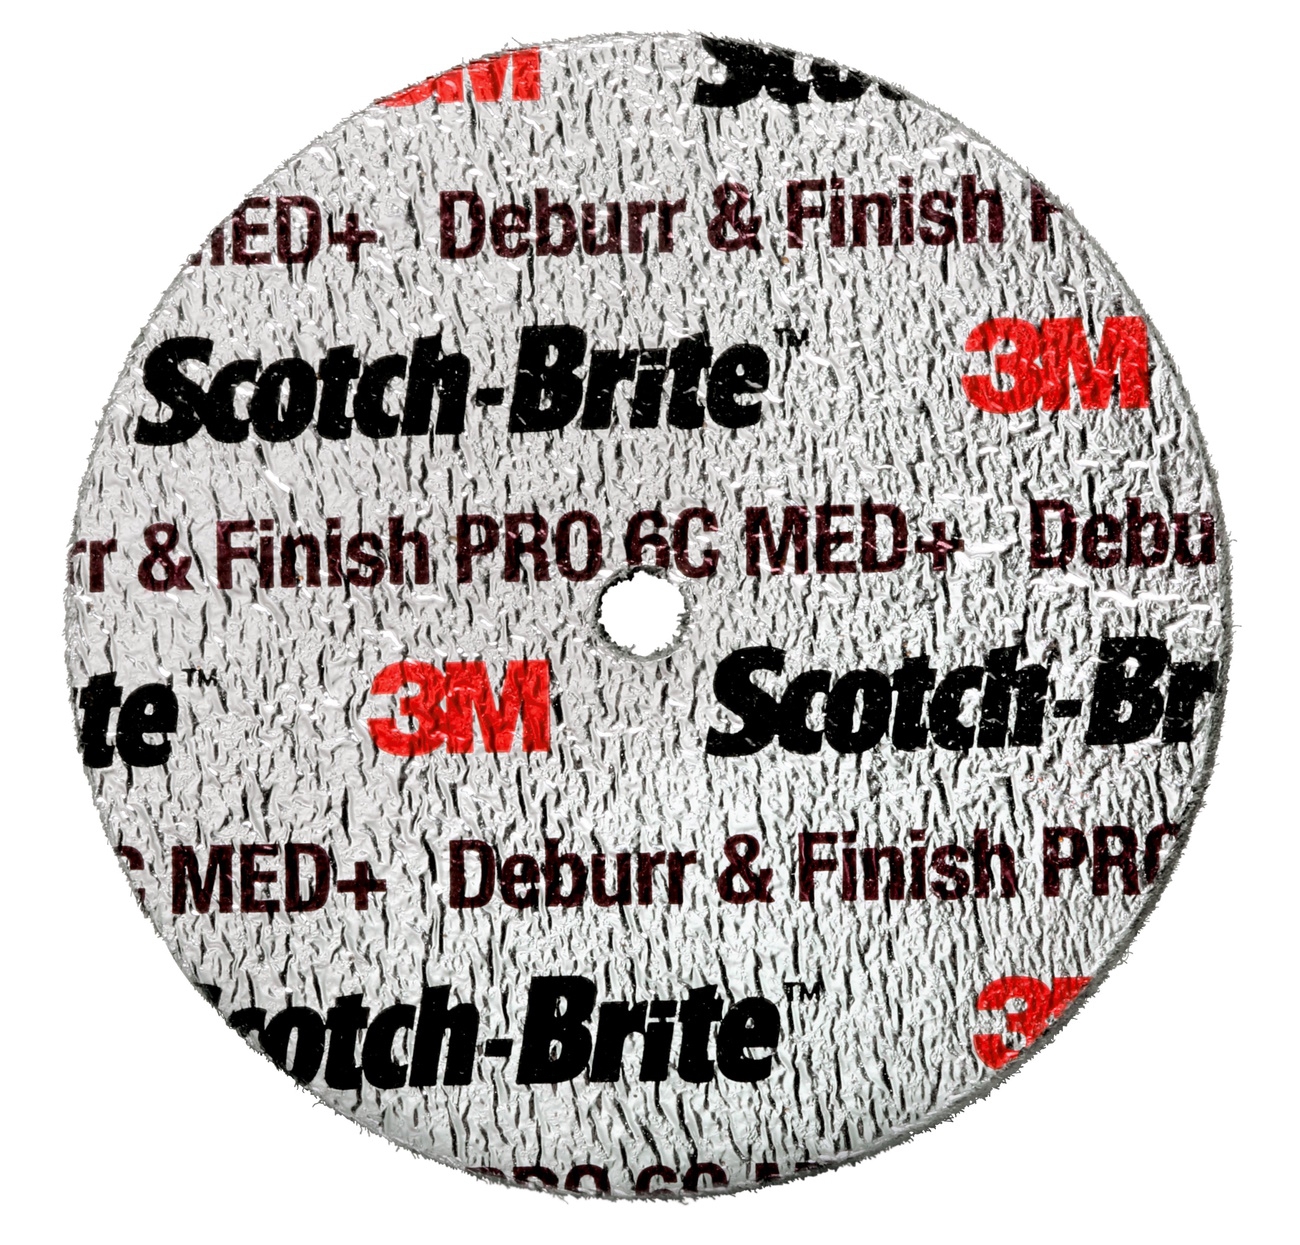 3M Scotch-Brite Deburr and Finish PRO compact disc DP-UW, 152 mm x 25.4 mm x 12.7 mm, 6C Med+, 2 WL